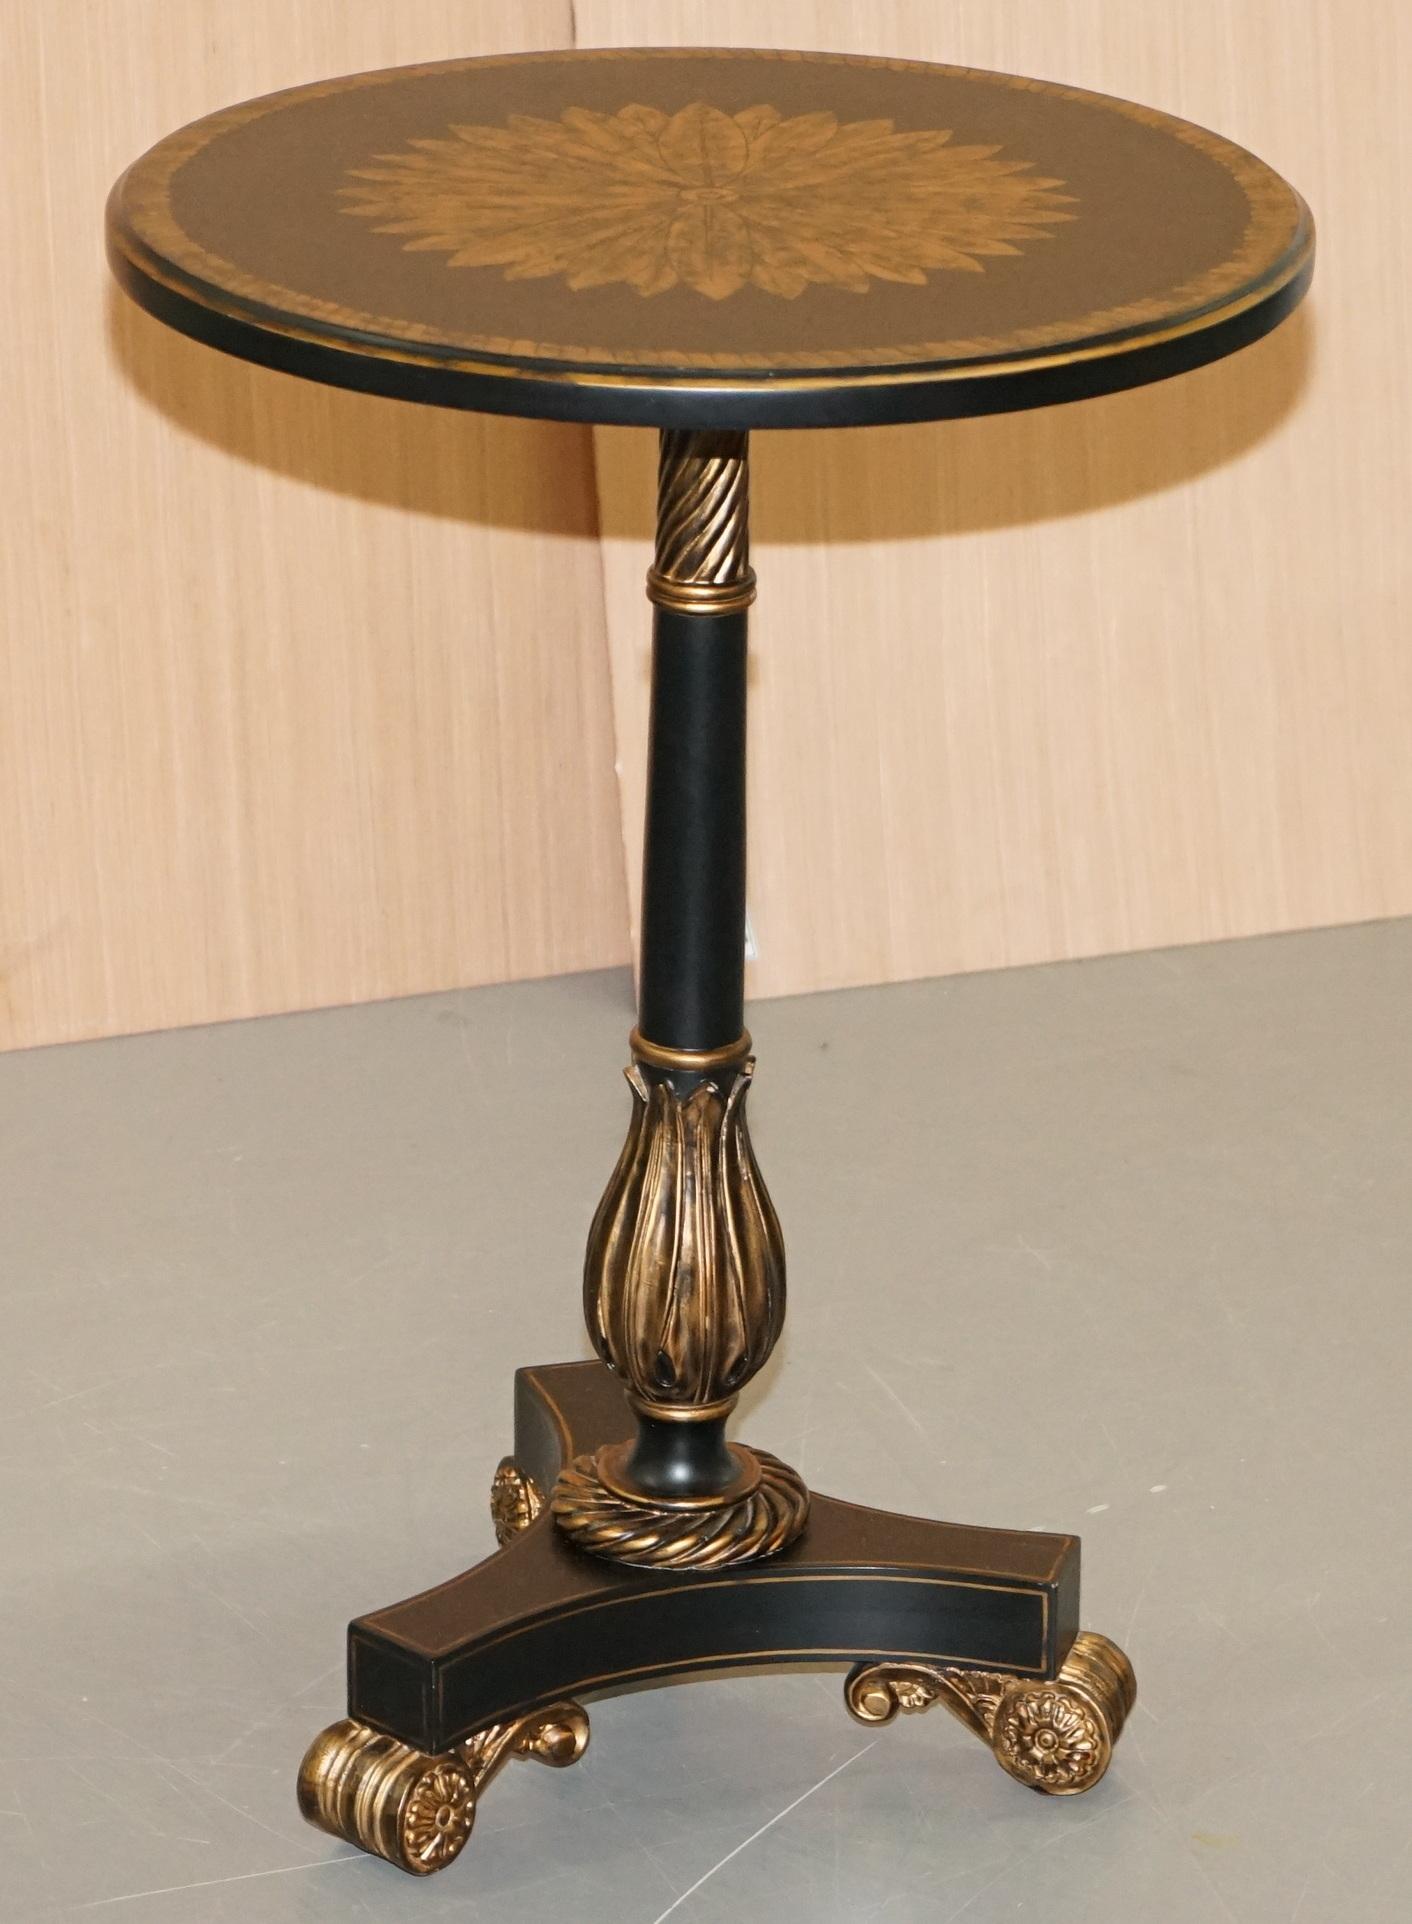 We are delighted to offer for sale this lovely ebonised black with Sun burst gold occasional lamp table by Maitland-Smith

A very good looking and decorative table, designed as a lamp or wine table, the gold leaf detailing is sublime in the right